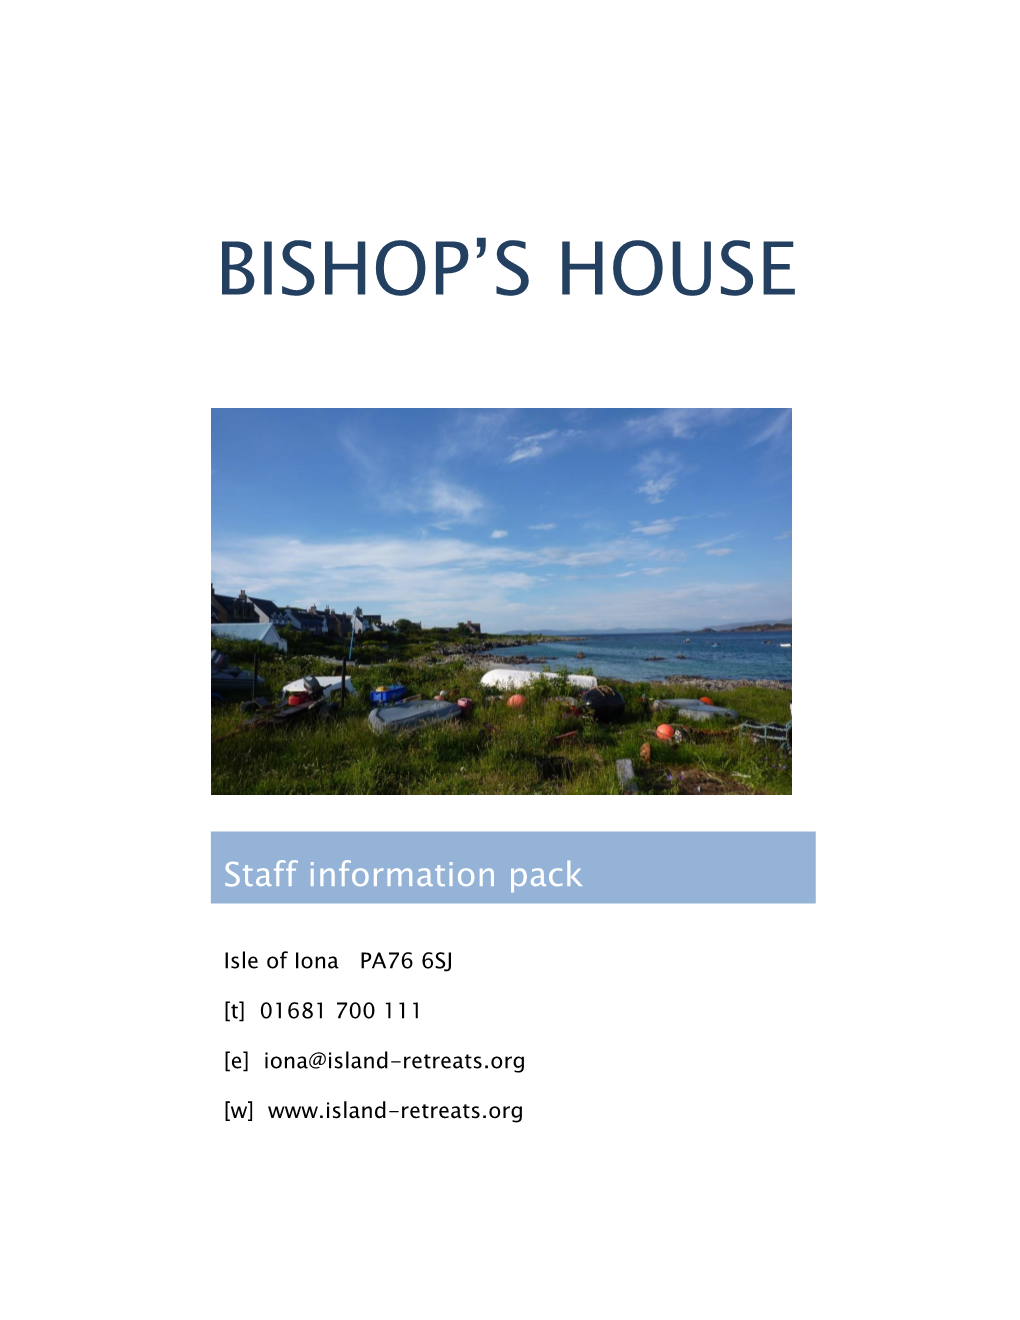 Bishop's House for Advice